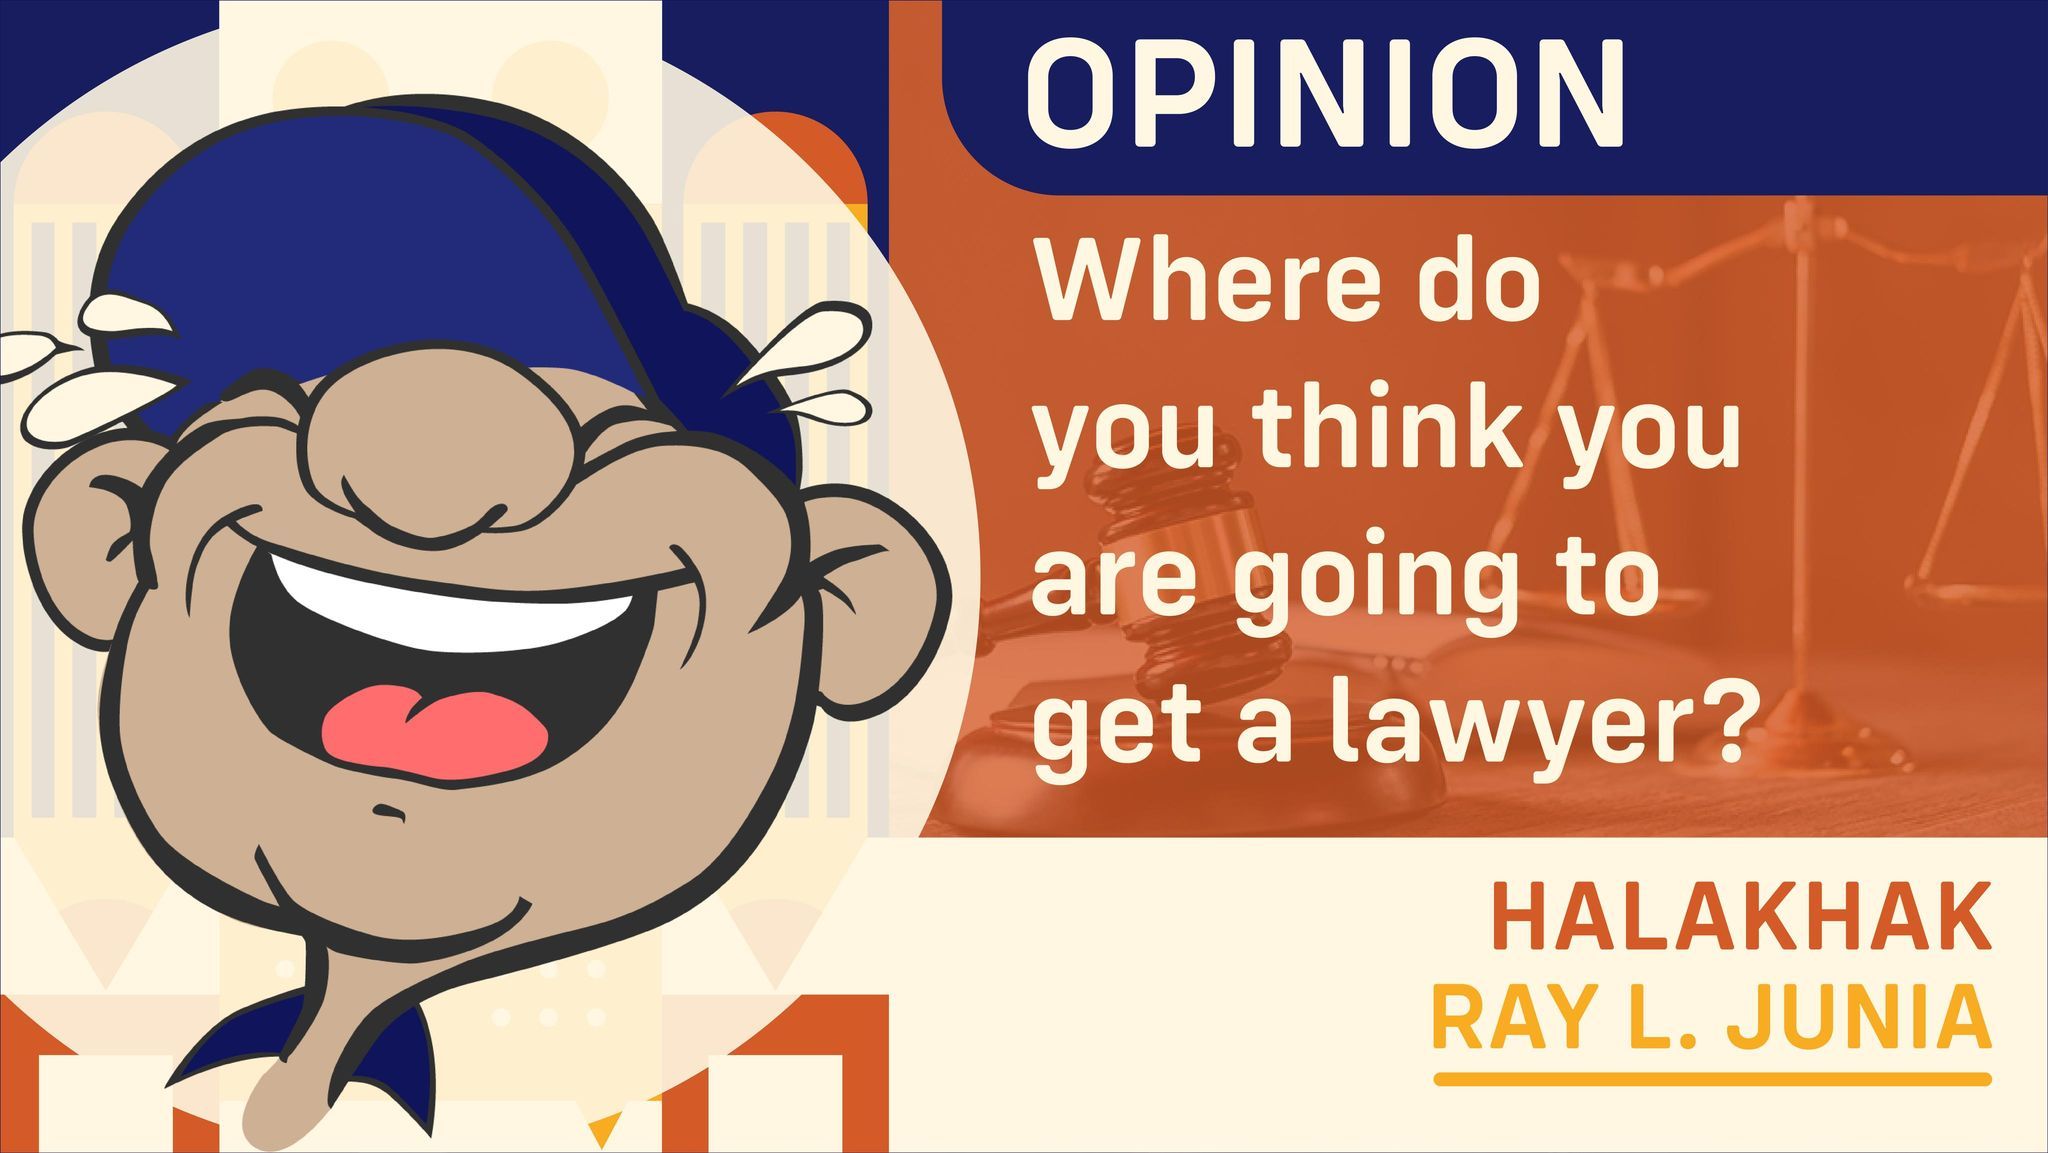 Where do you think you are going to get a lawyer?